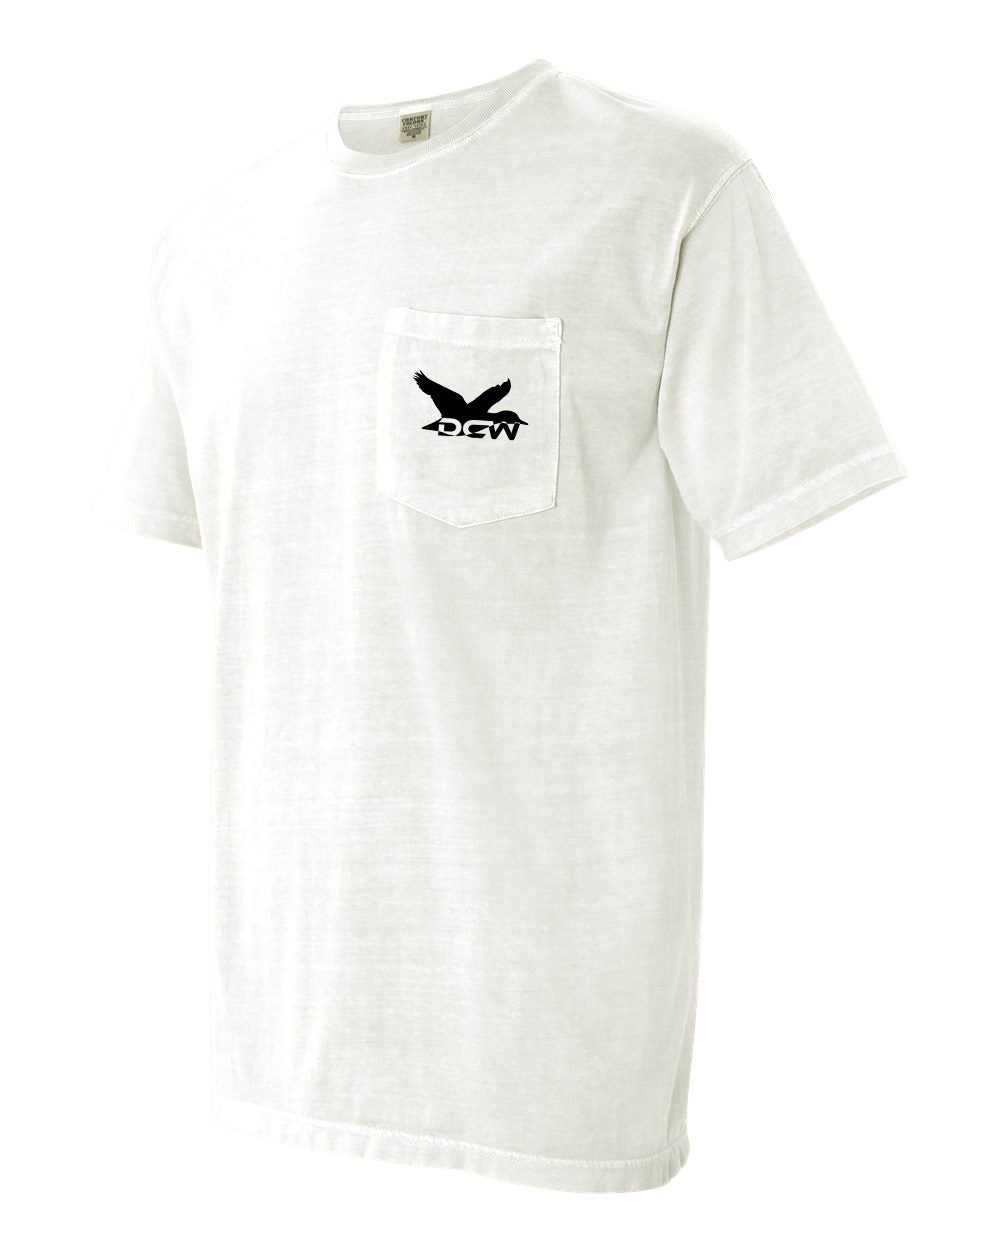 Banded - Comfort Colors Pocket Tee